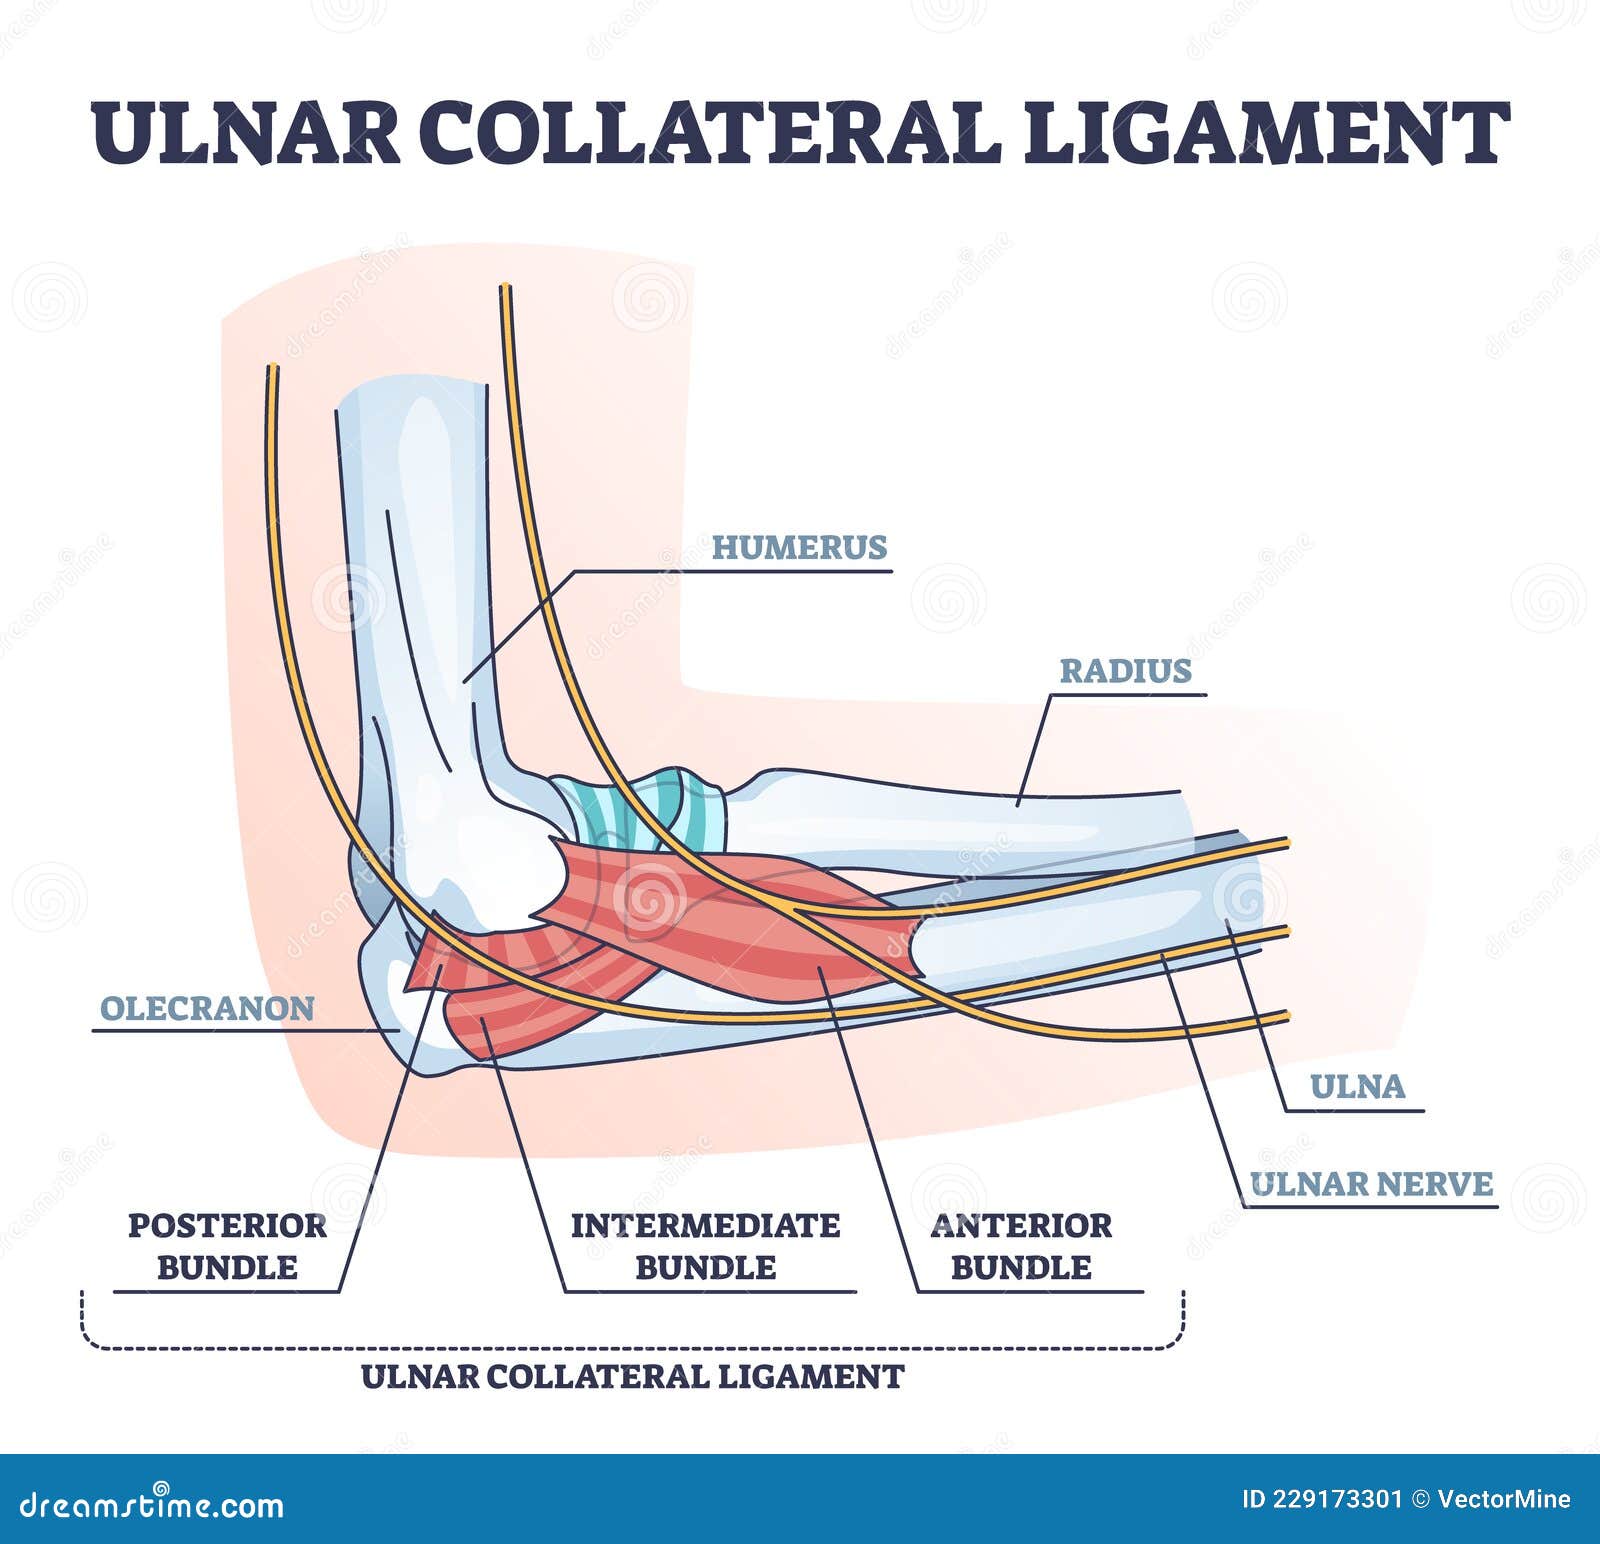 ulnar collateral ligament or ucl with anatomical structure outline diagram